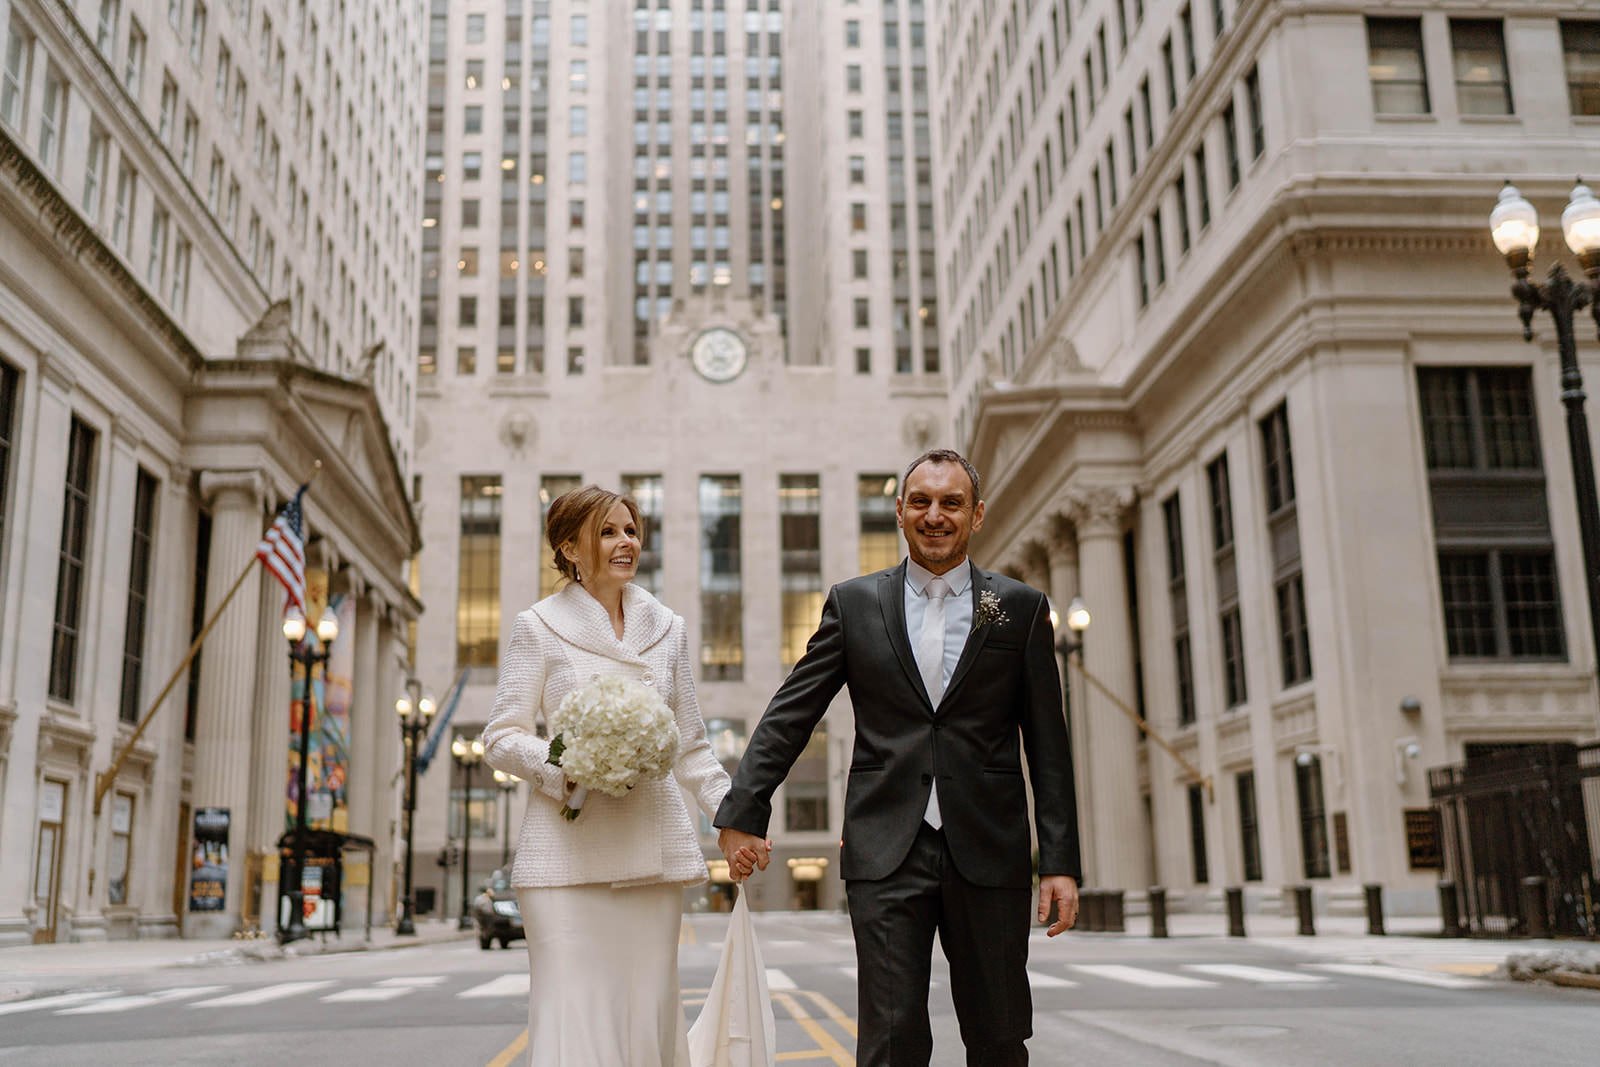 Portraits after an intimate City Hall Elopement